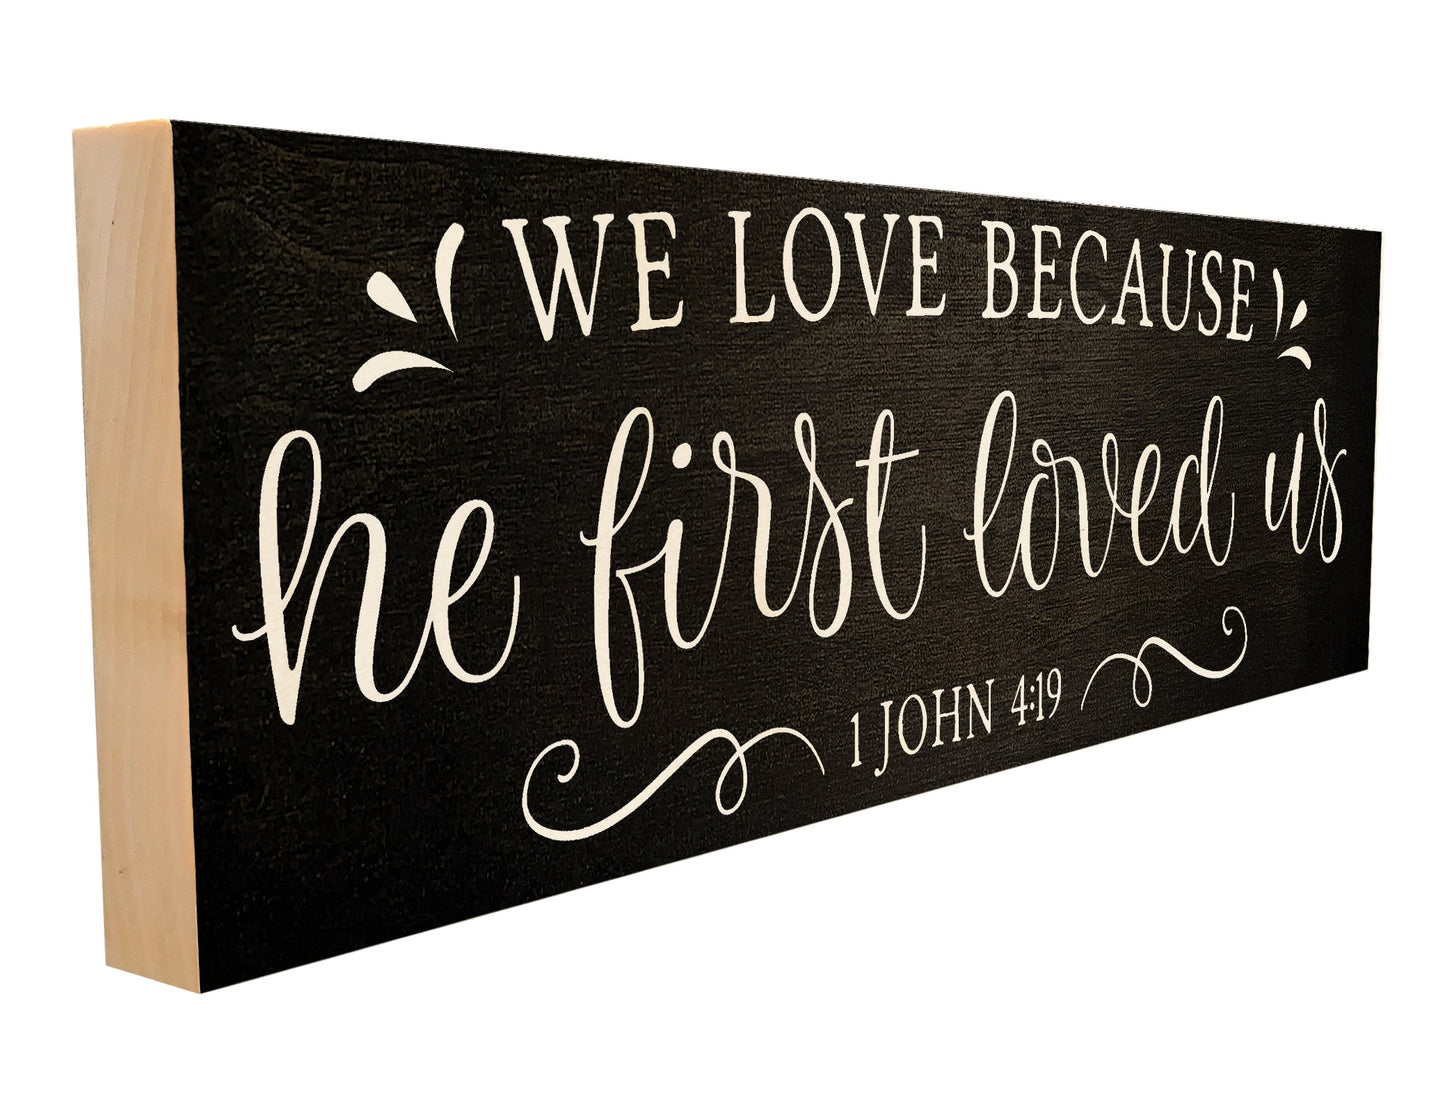 We Love Because He First Loved Us. 1st John 4:19.